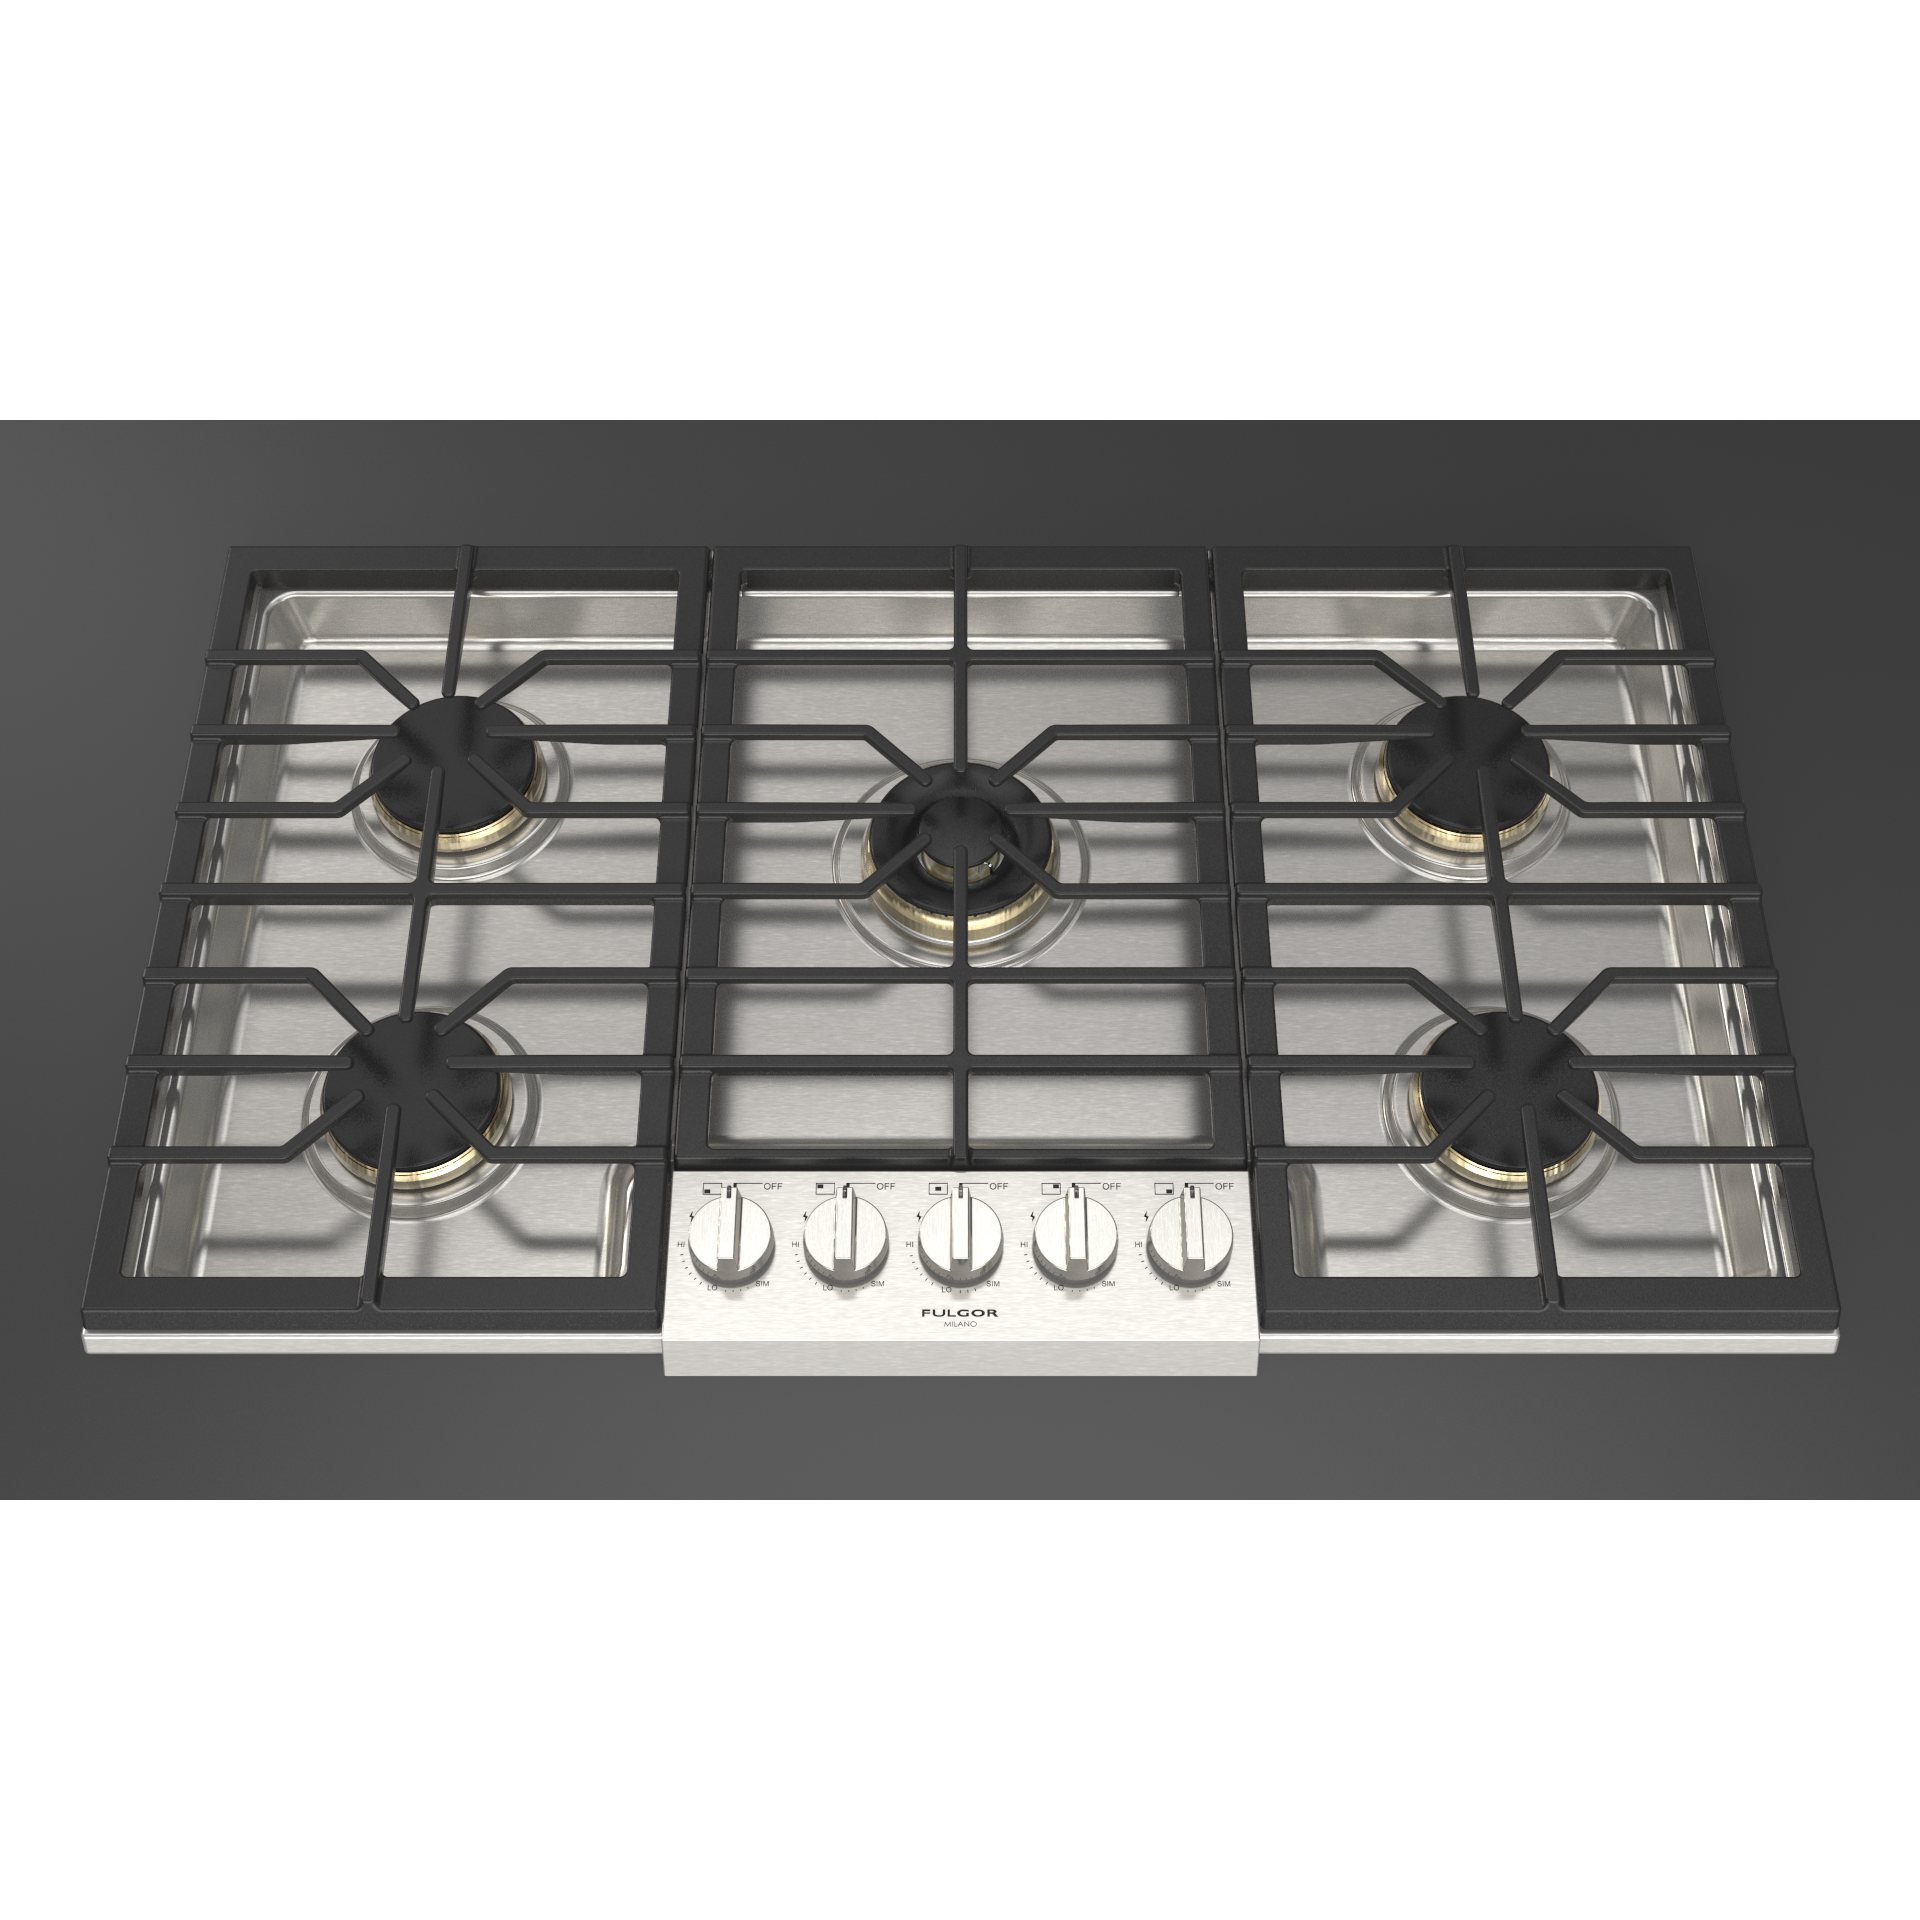 Fulgor Milano 36" Pro-Style Natural Gas Cooktop with 1 Solid Brass Dual-Flame Burner - F6PGK365S1